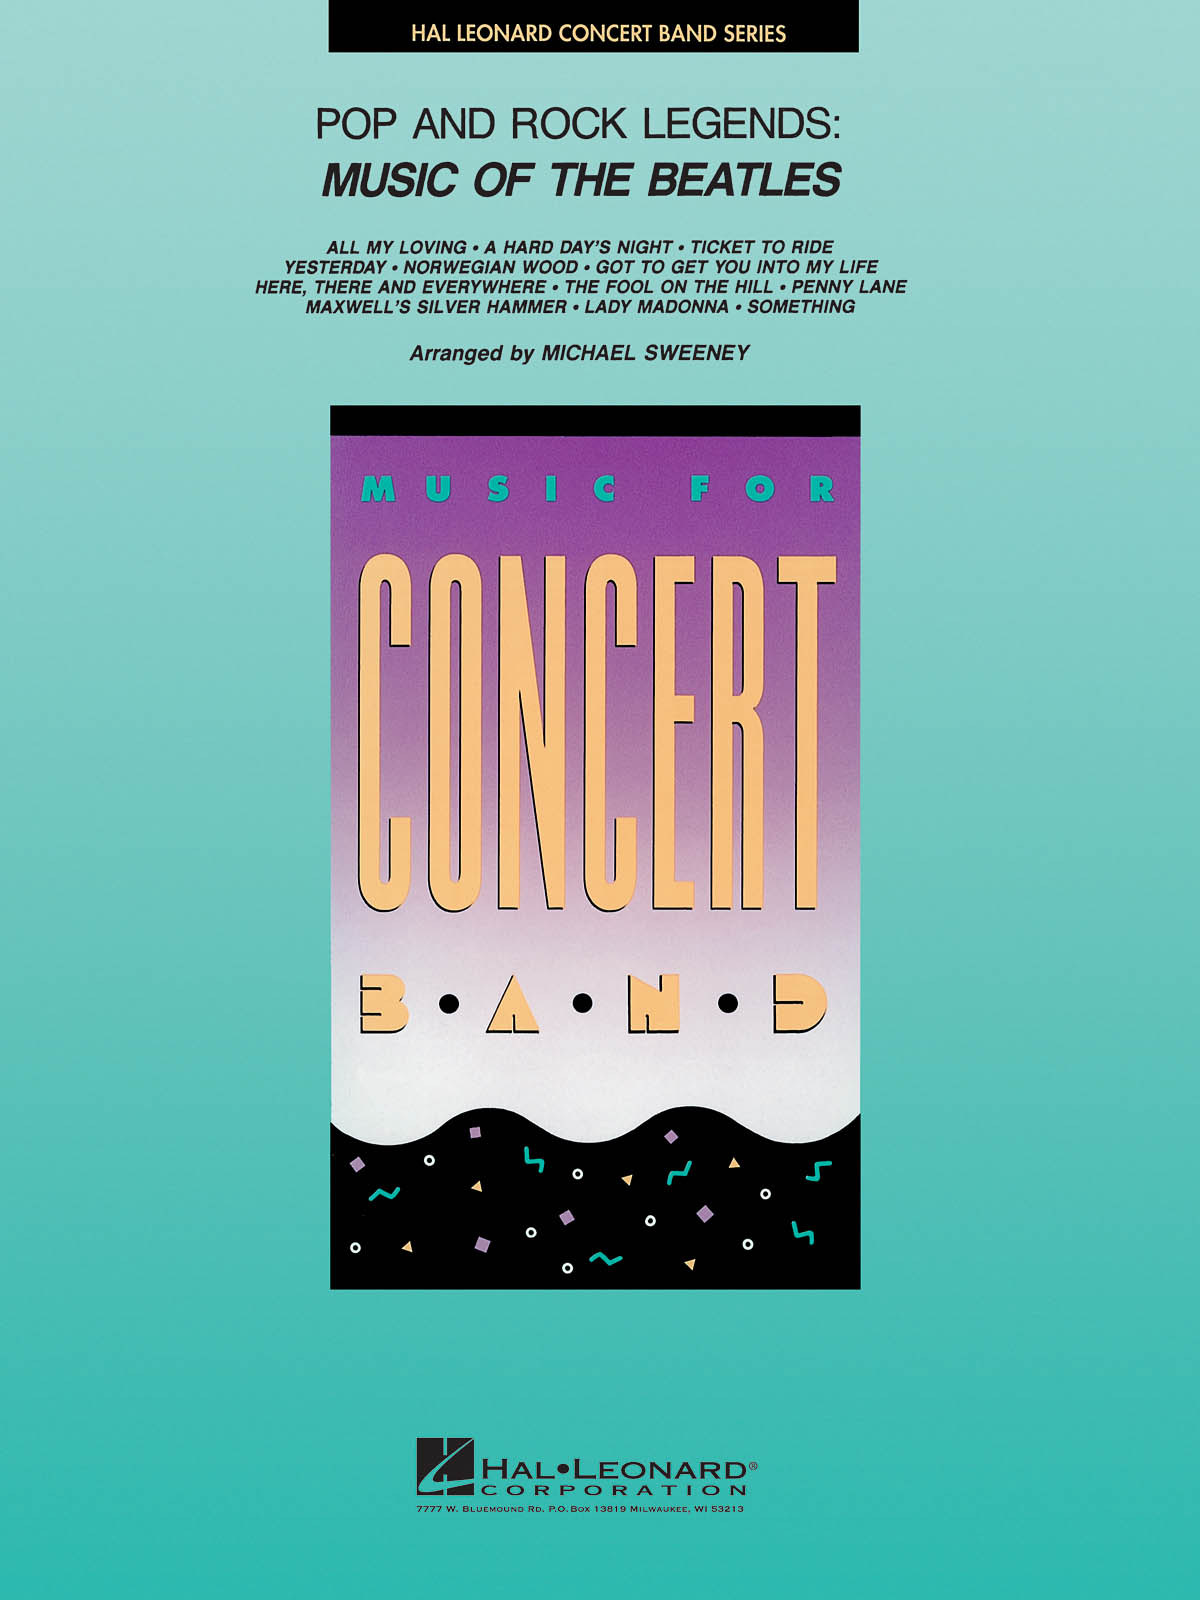 The Beatles: Pop and Rock Legends: Music of the Beatles: Concert Band: Score